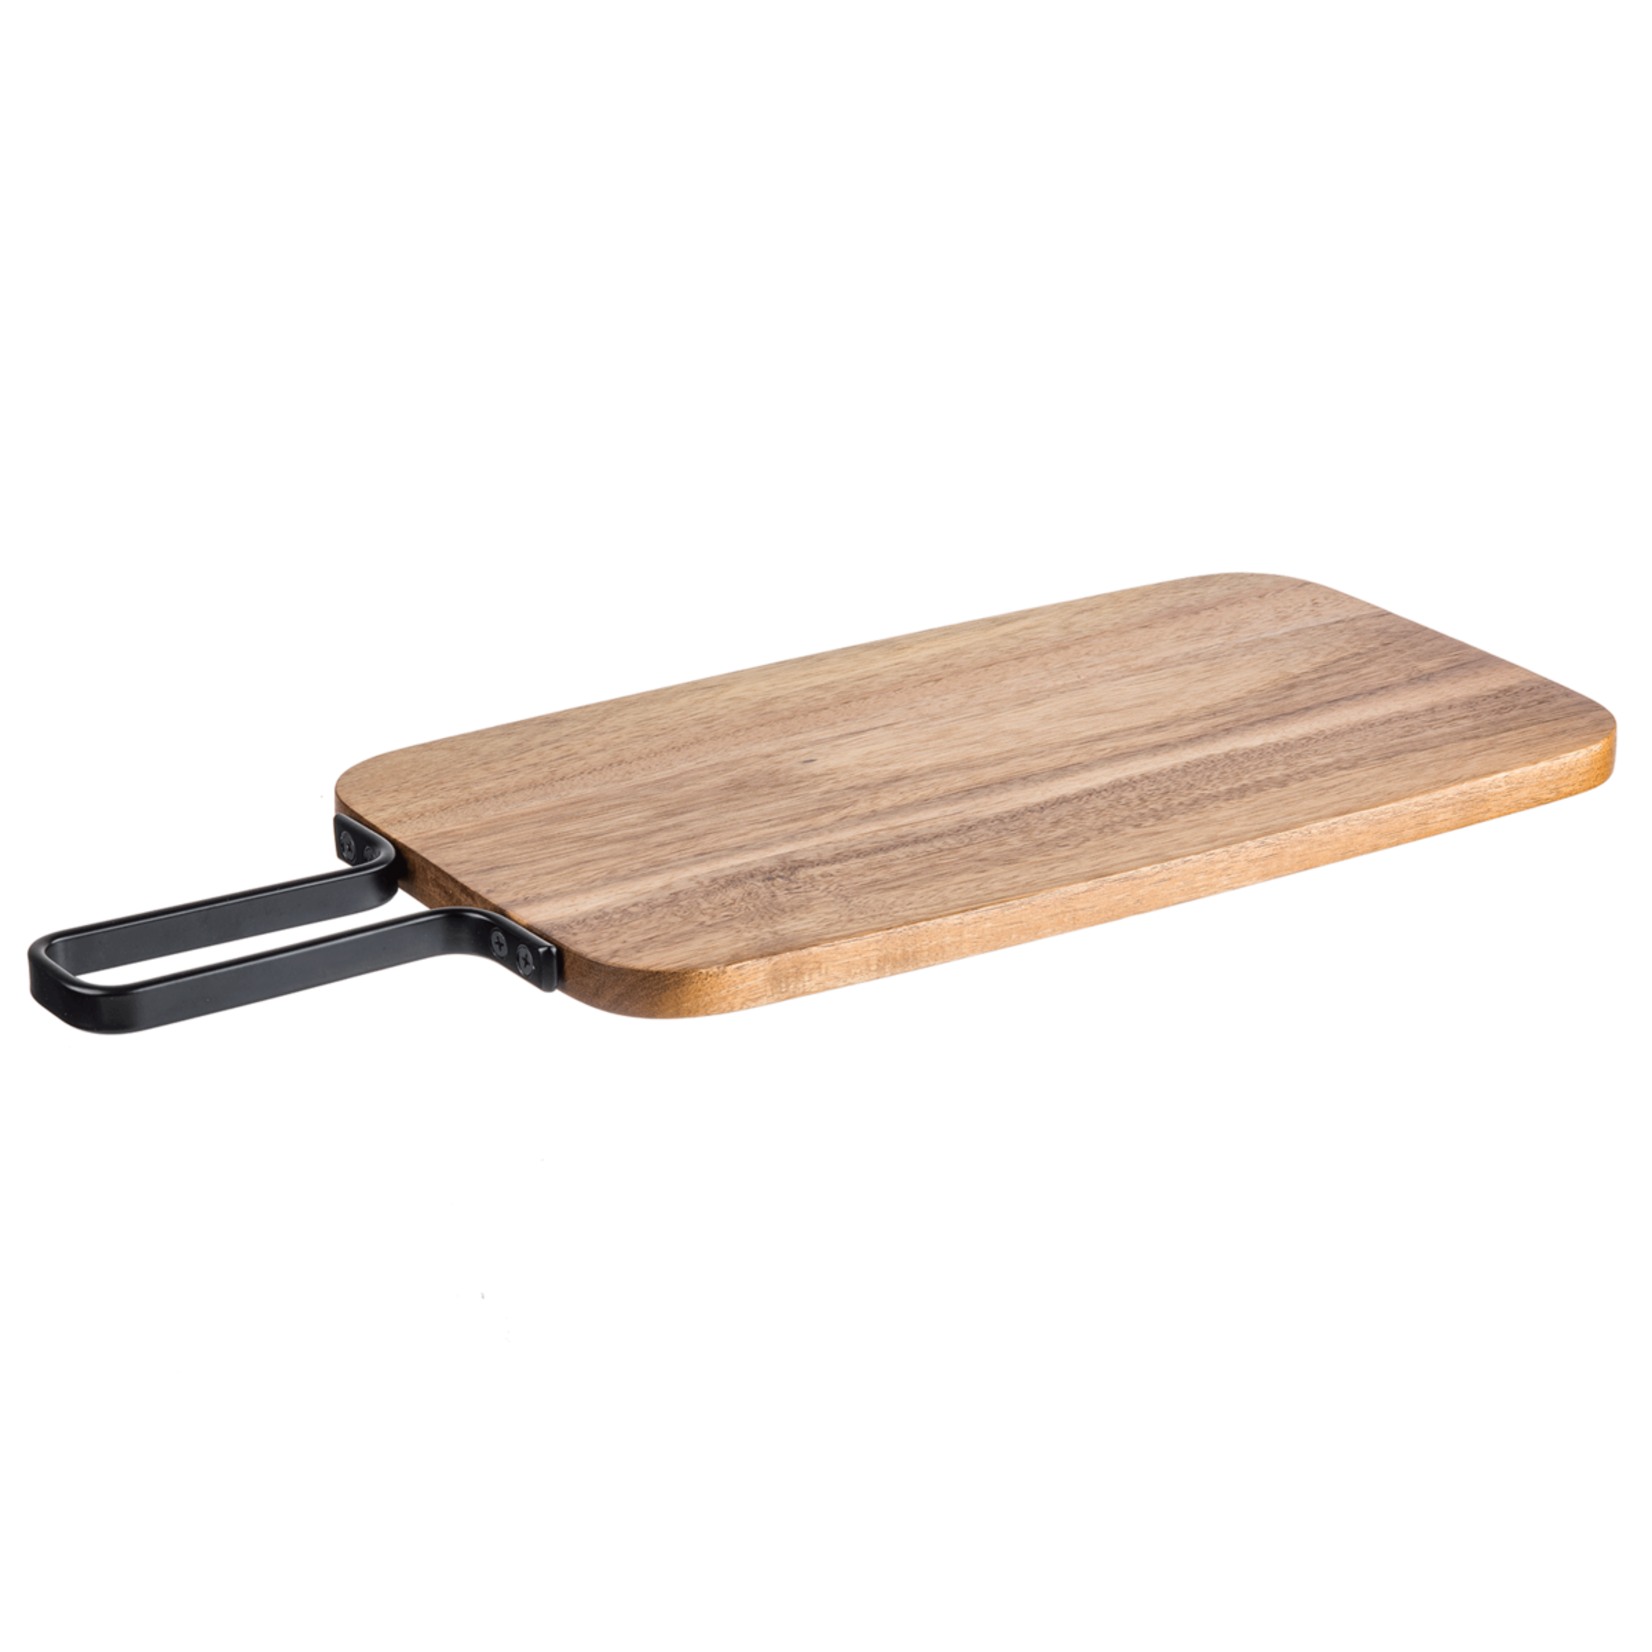 TableCraft Industrial Collection™ Rectangular Paddle, Acacia with Metal Banding, 8.5 x 15.125", 20.125" L w/ Handle